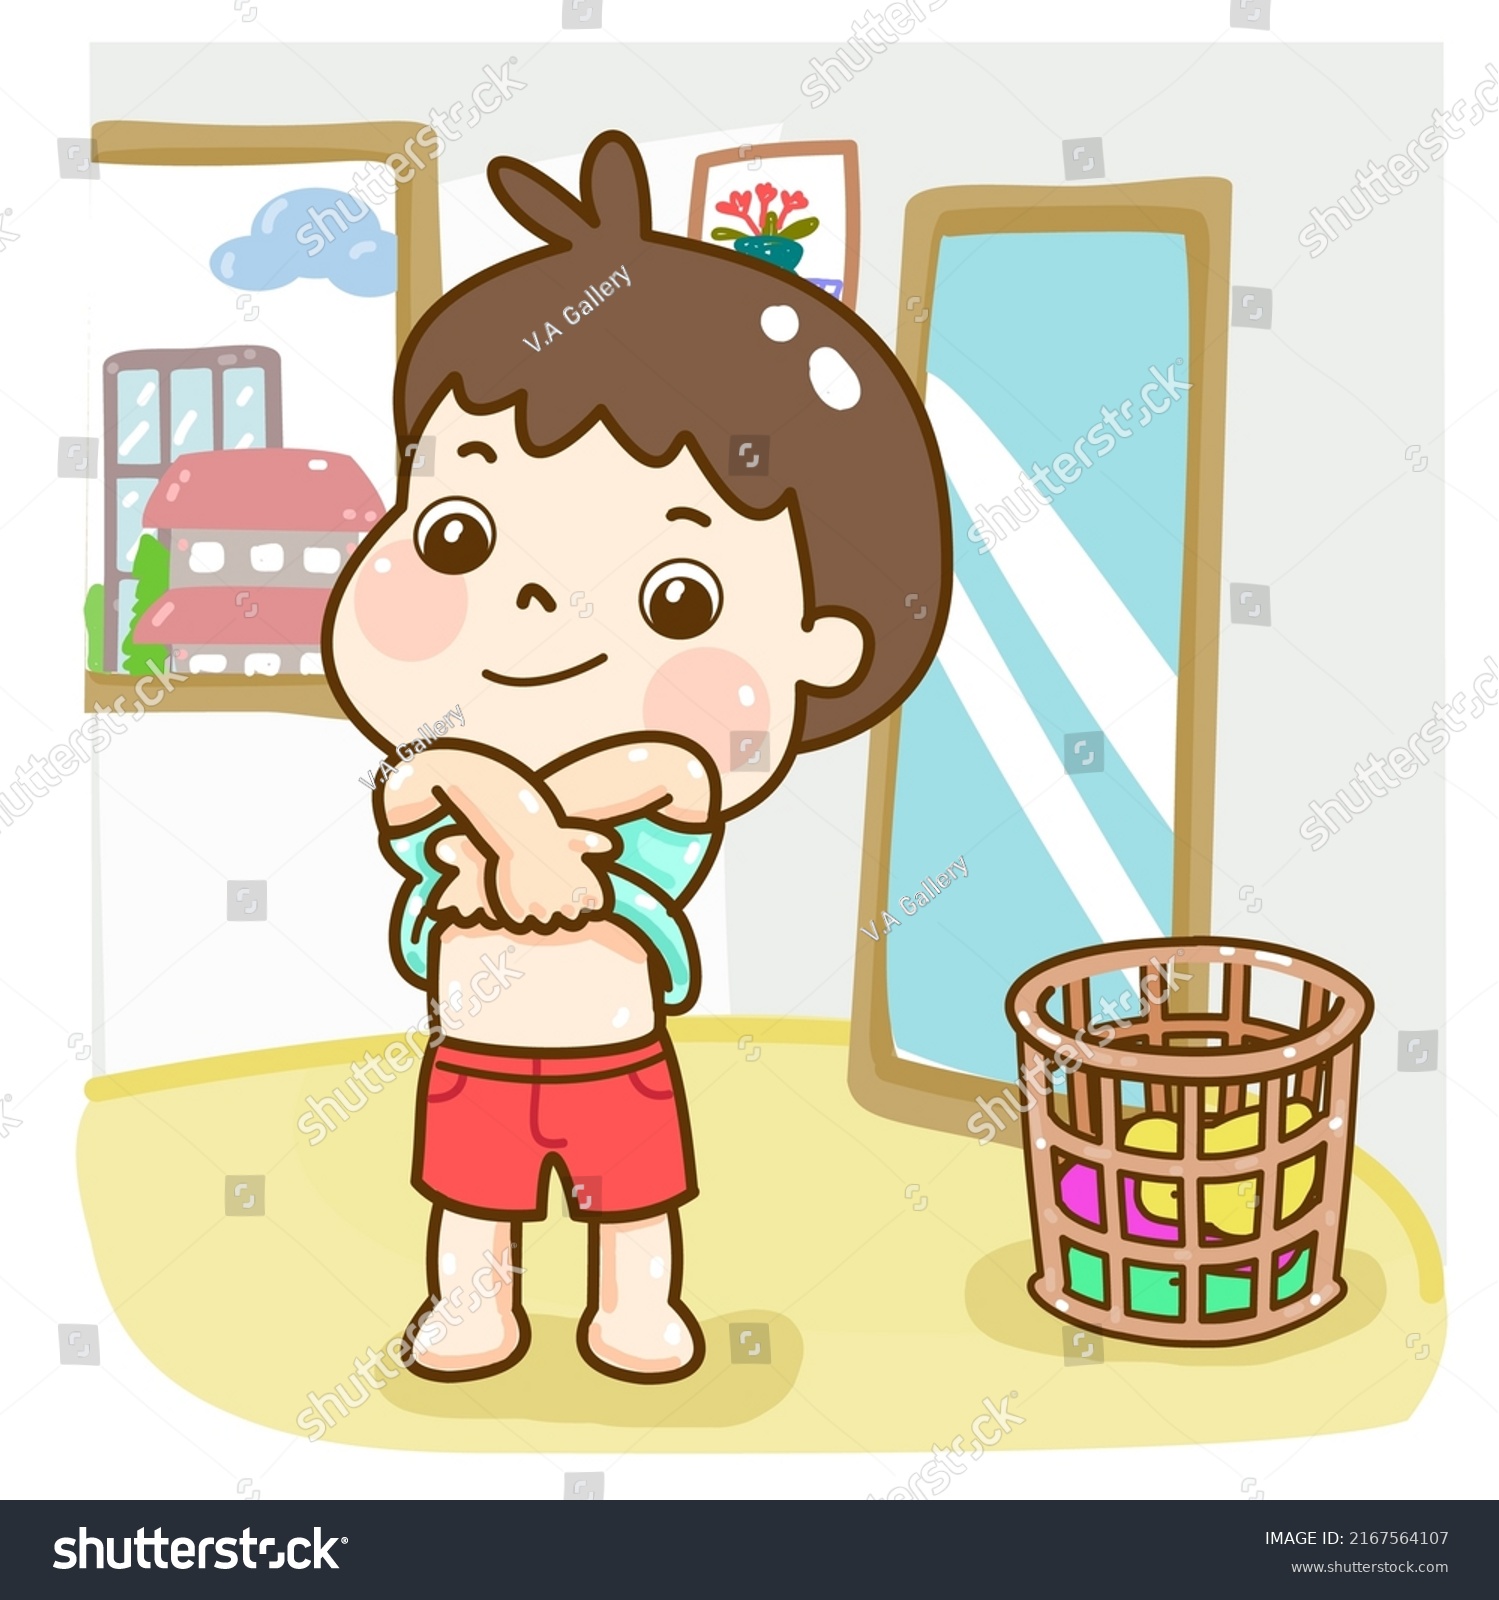 406 Kid Taking Off Clothes Images, Stock Photos & Vectors | Shutterstock